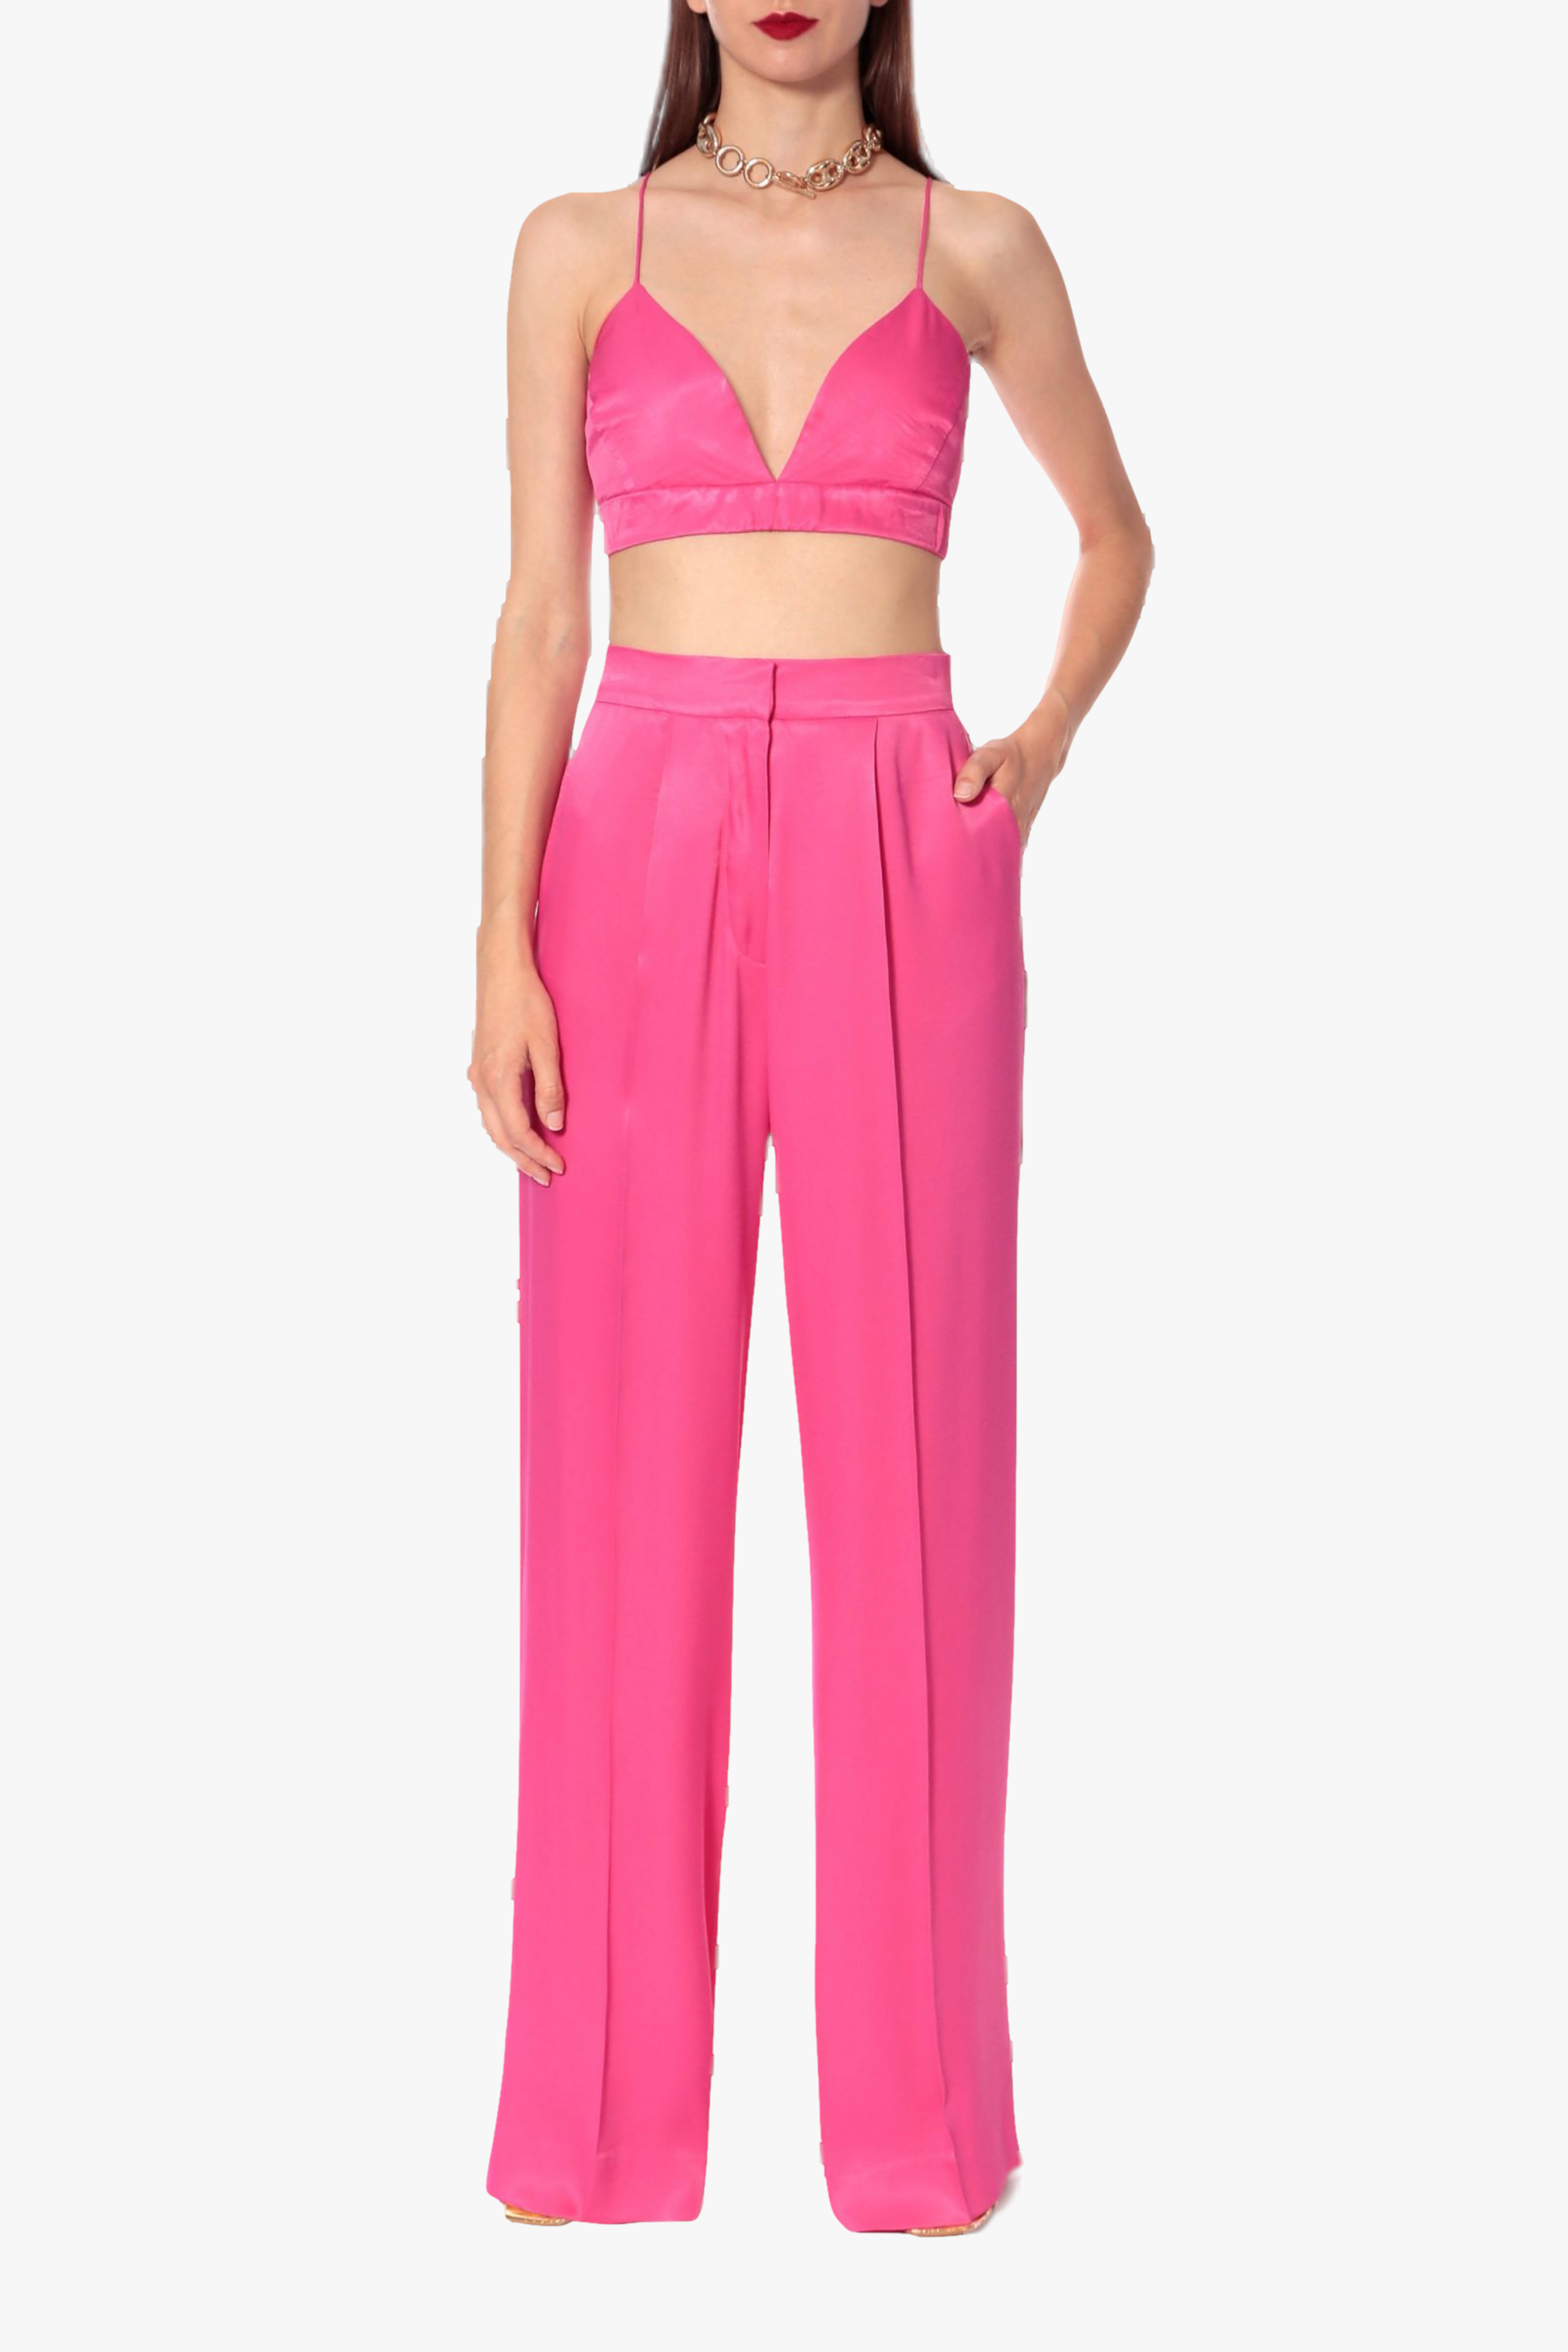 Shop Bralette Top Asha Satin Barbie Pink from AGGI at Seezona